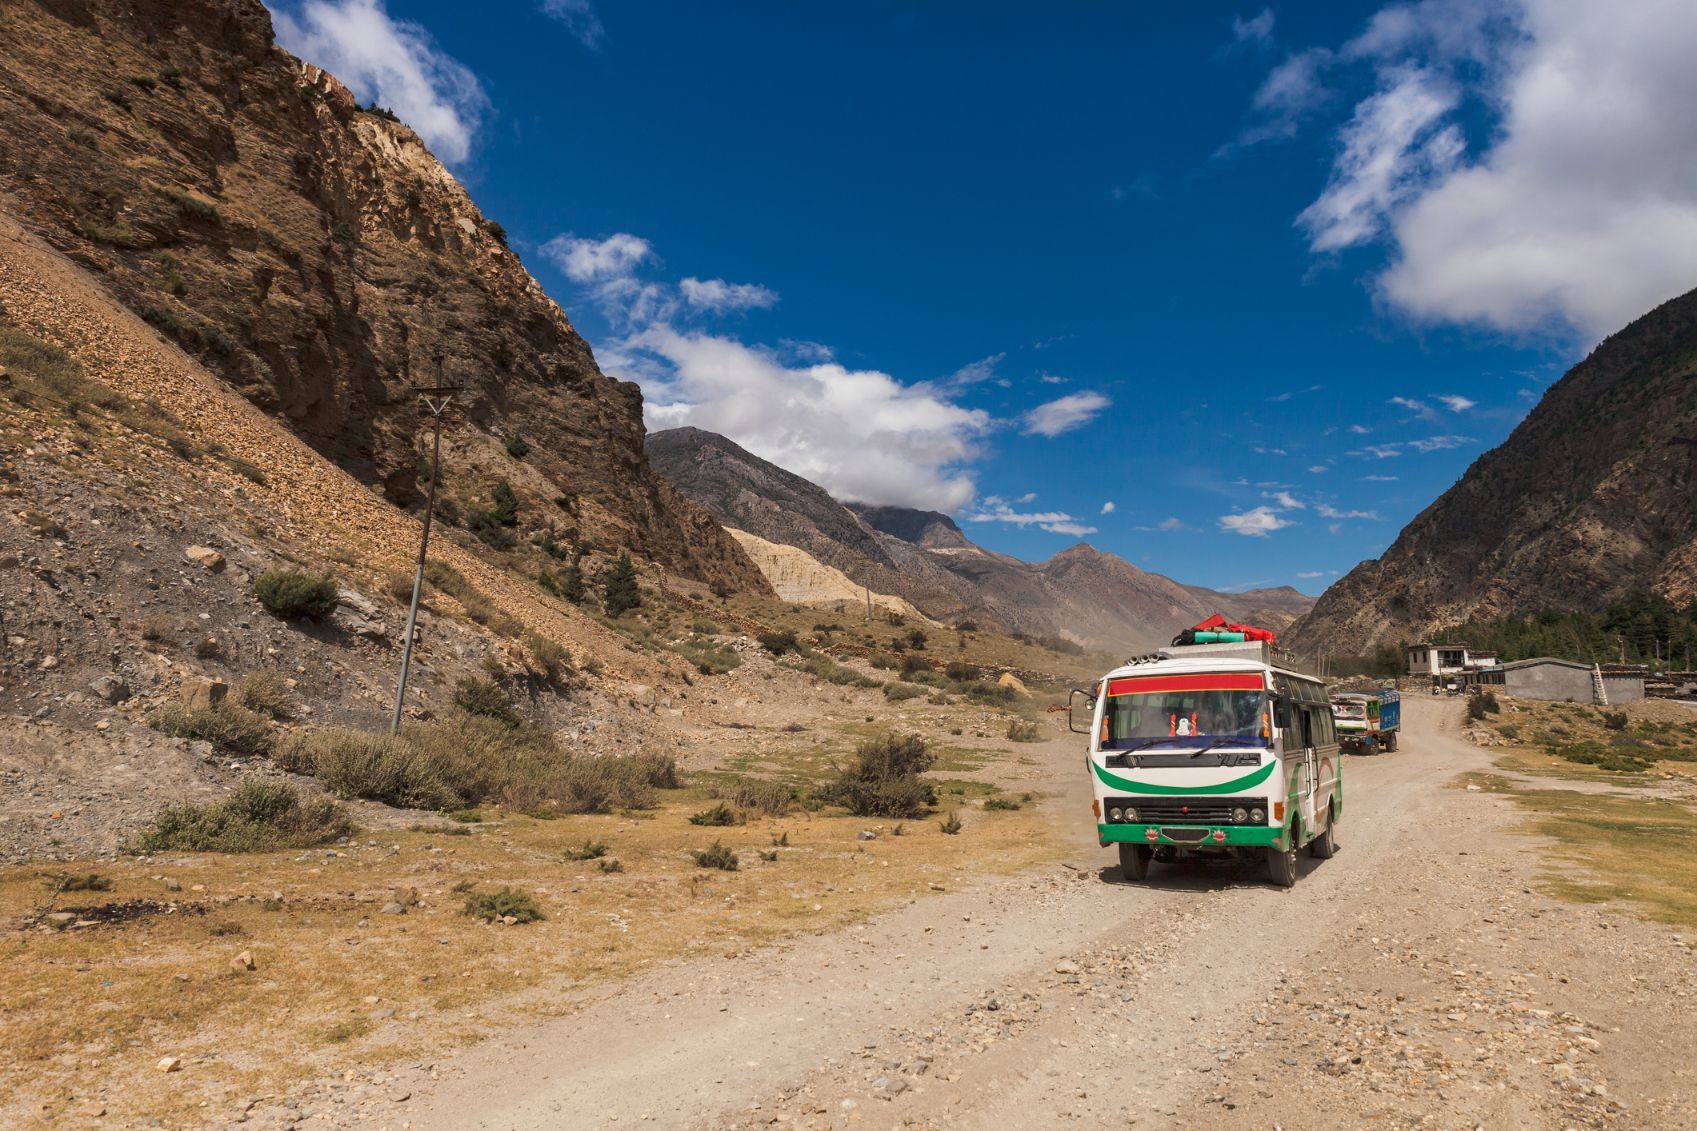 Riding on the bumpy roads of the Annapurna region. Photo: Getty